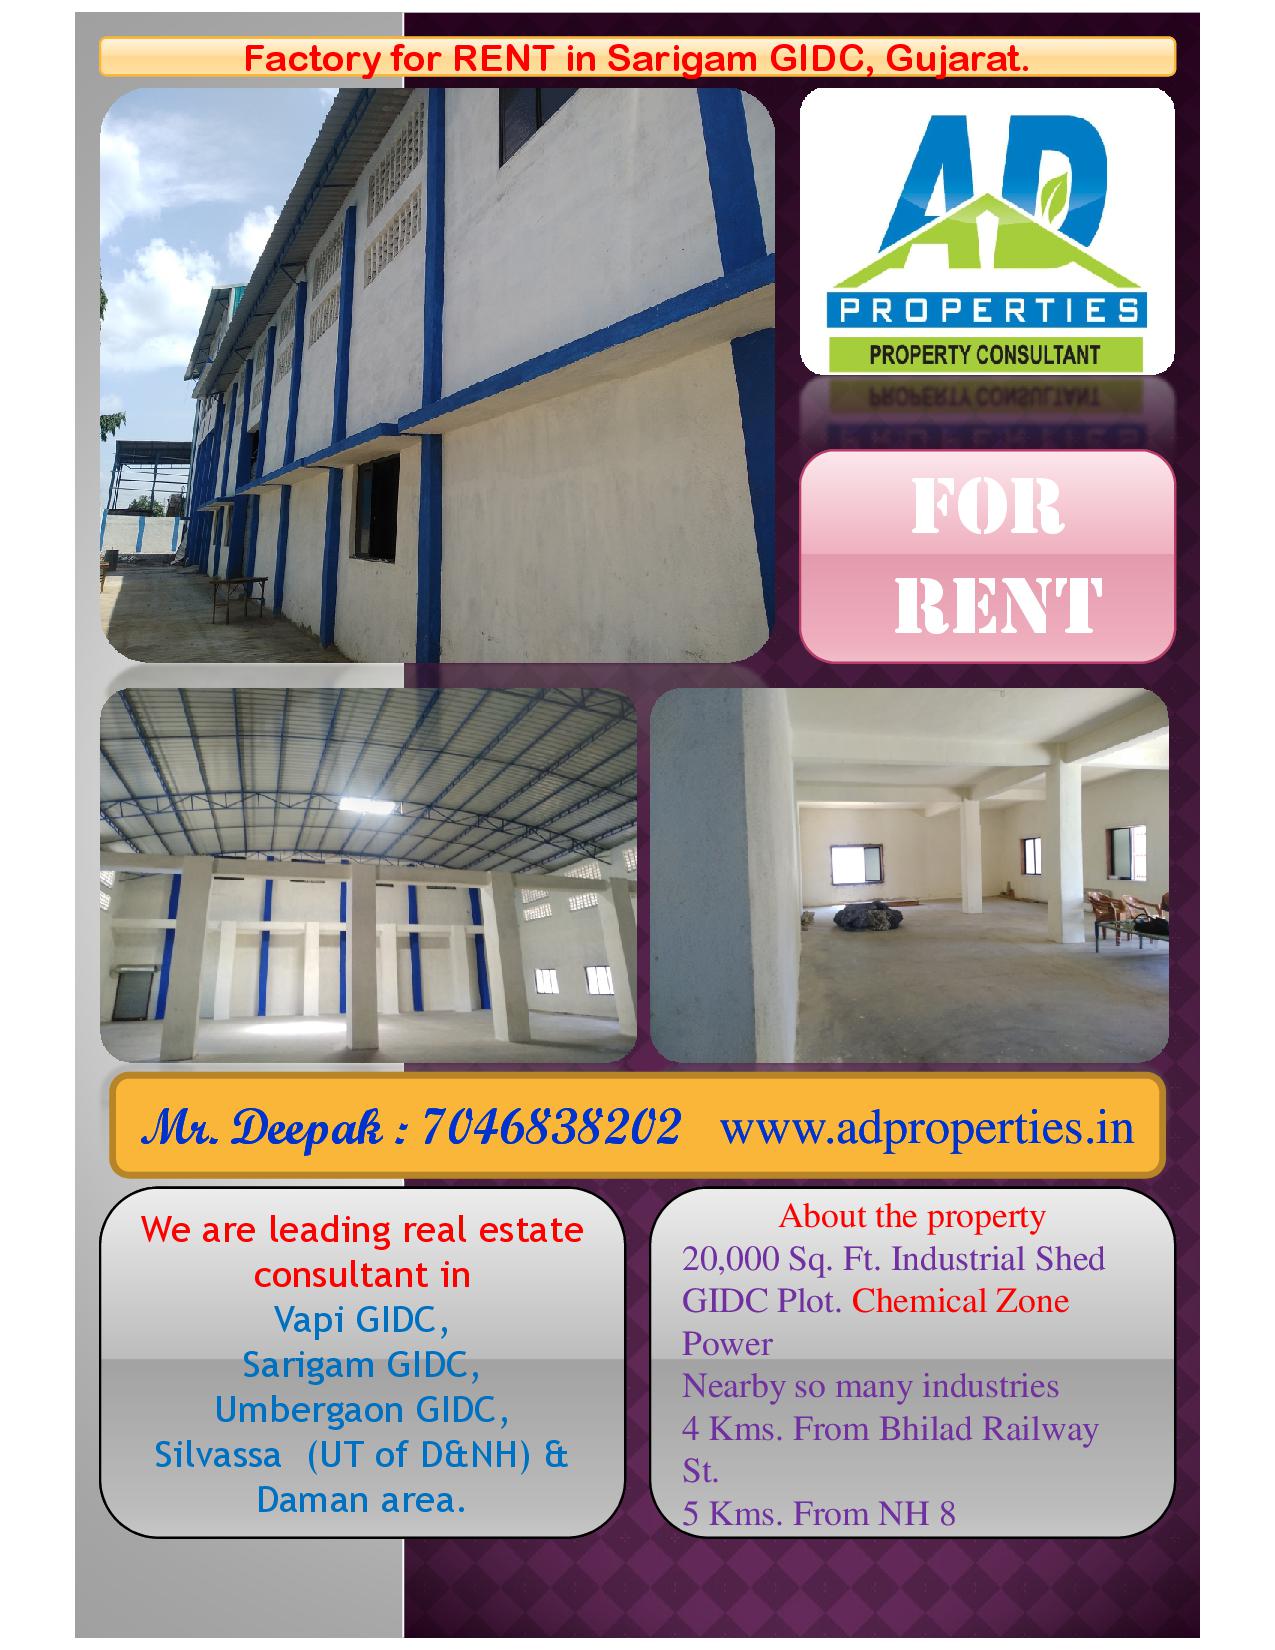 Factory for RENT at Sarigam GIDC